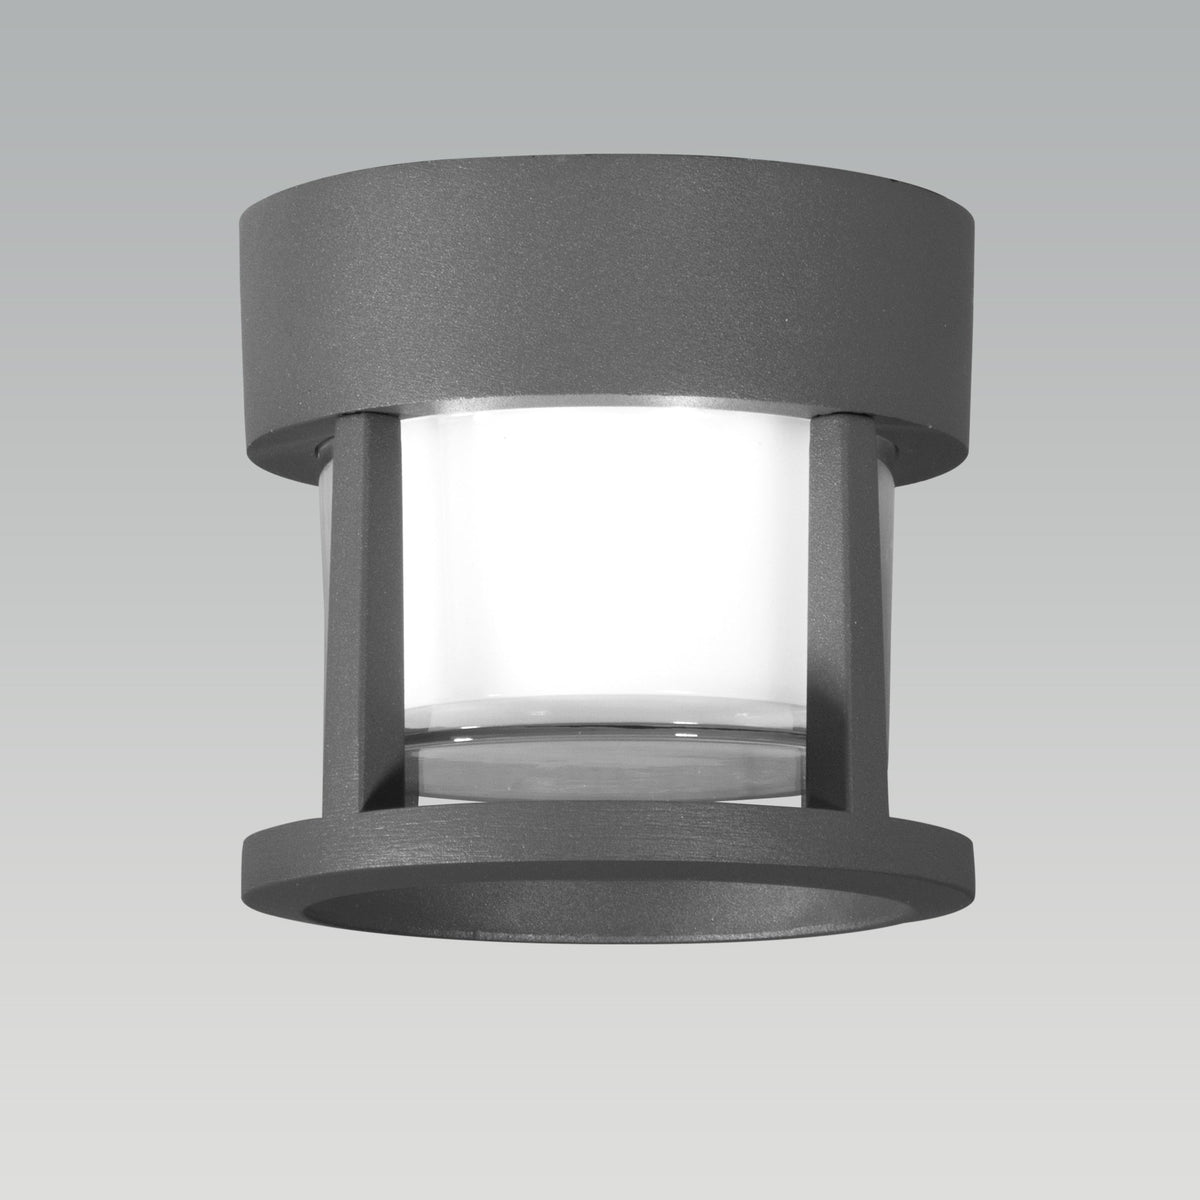 United Round Outdoor LED Ceiling Light online